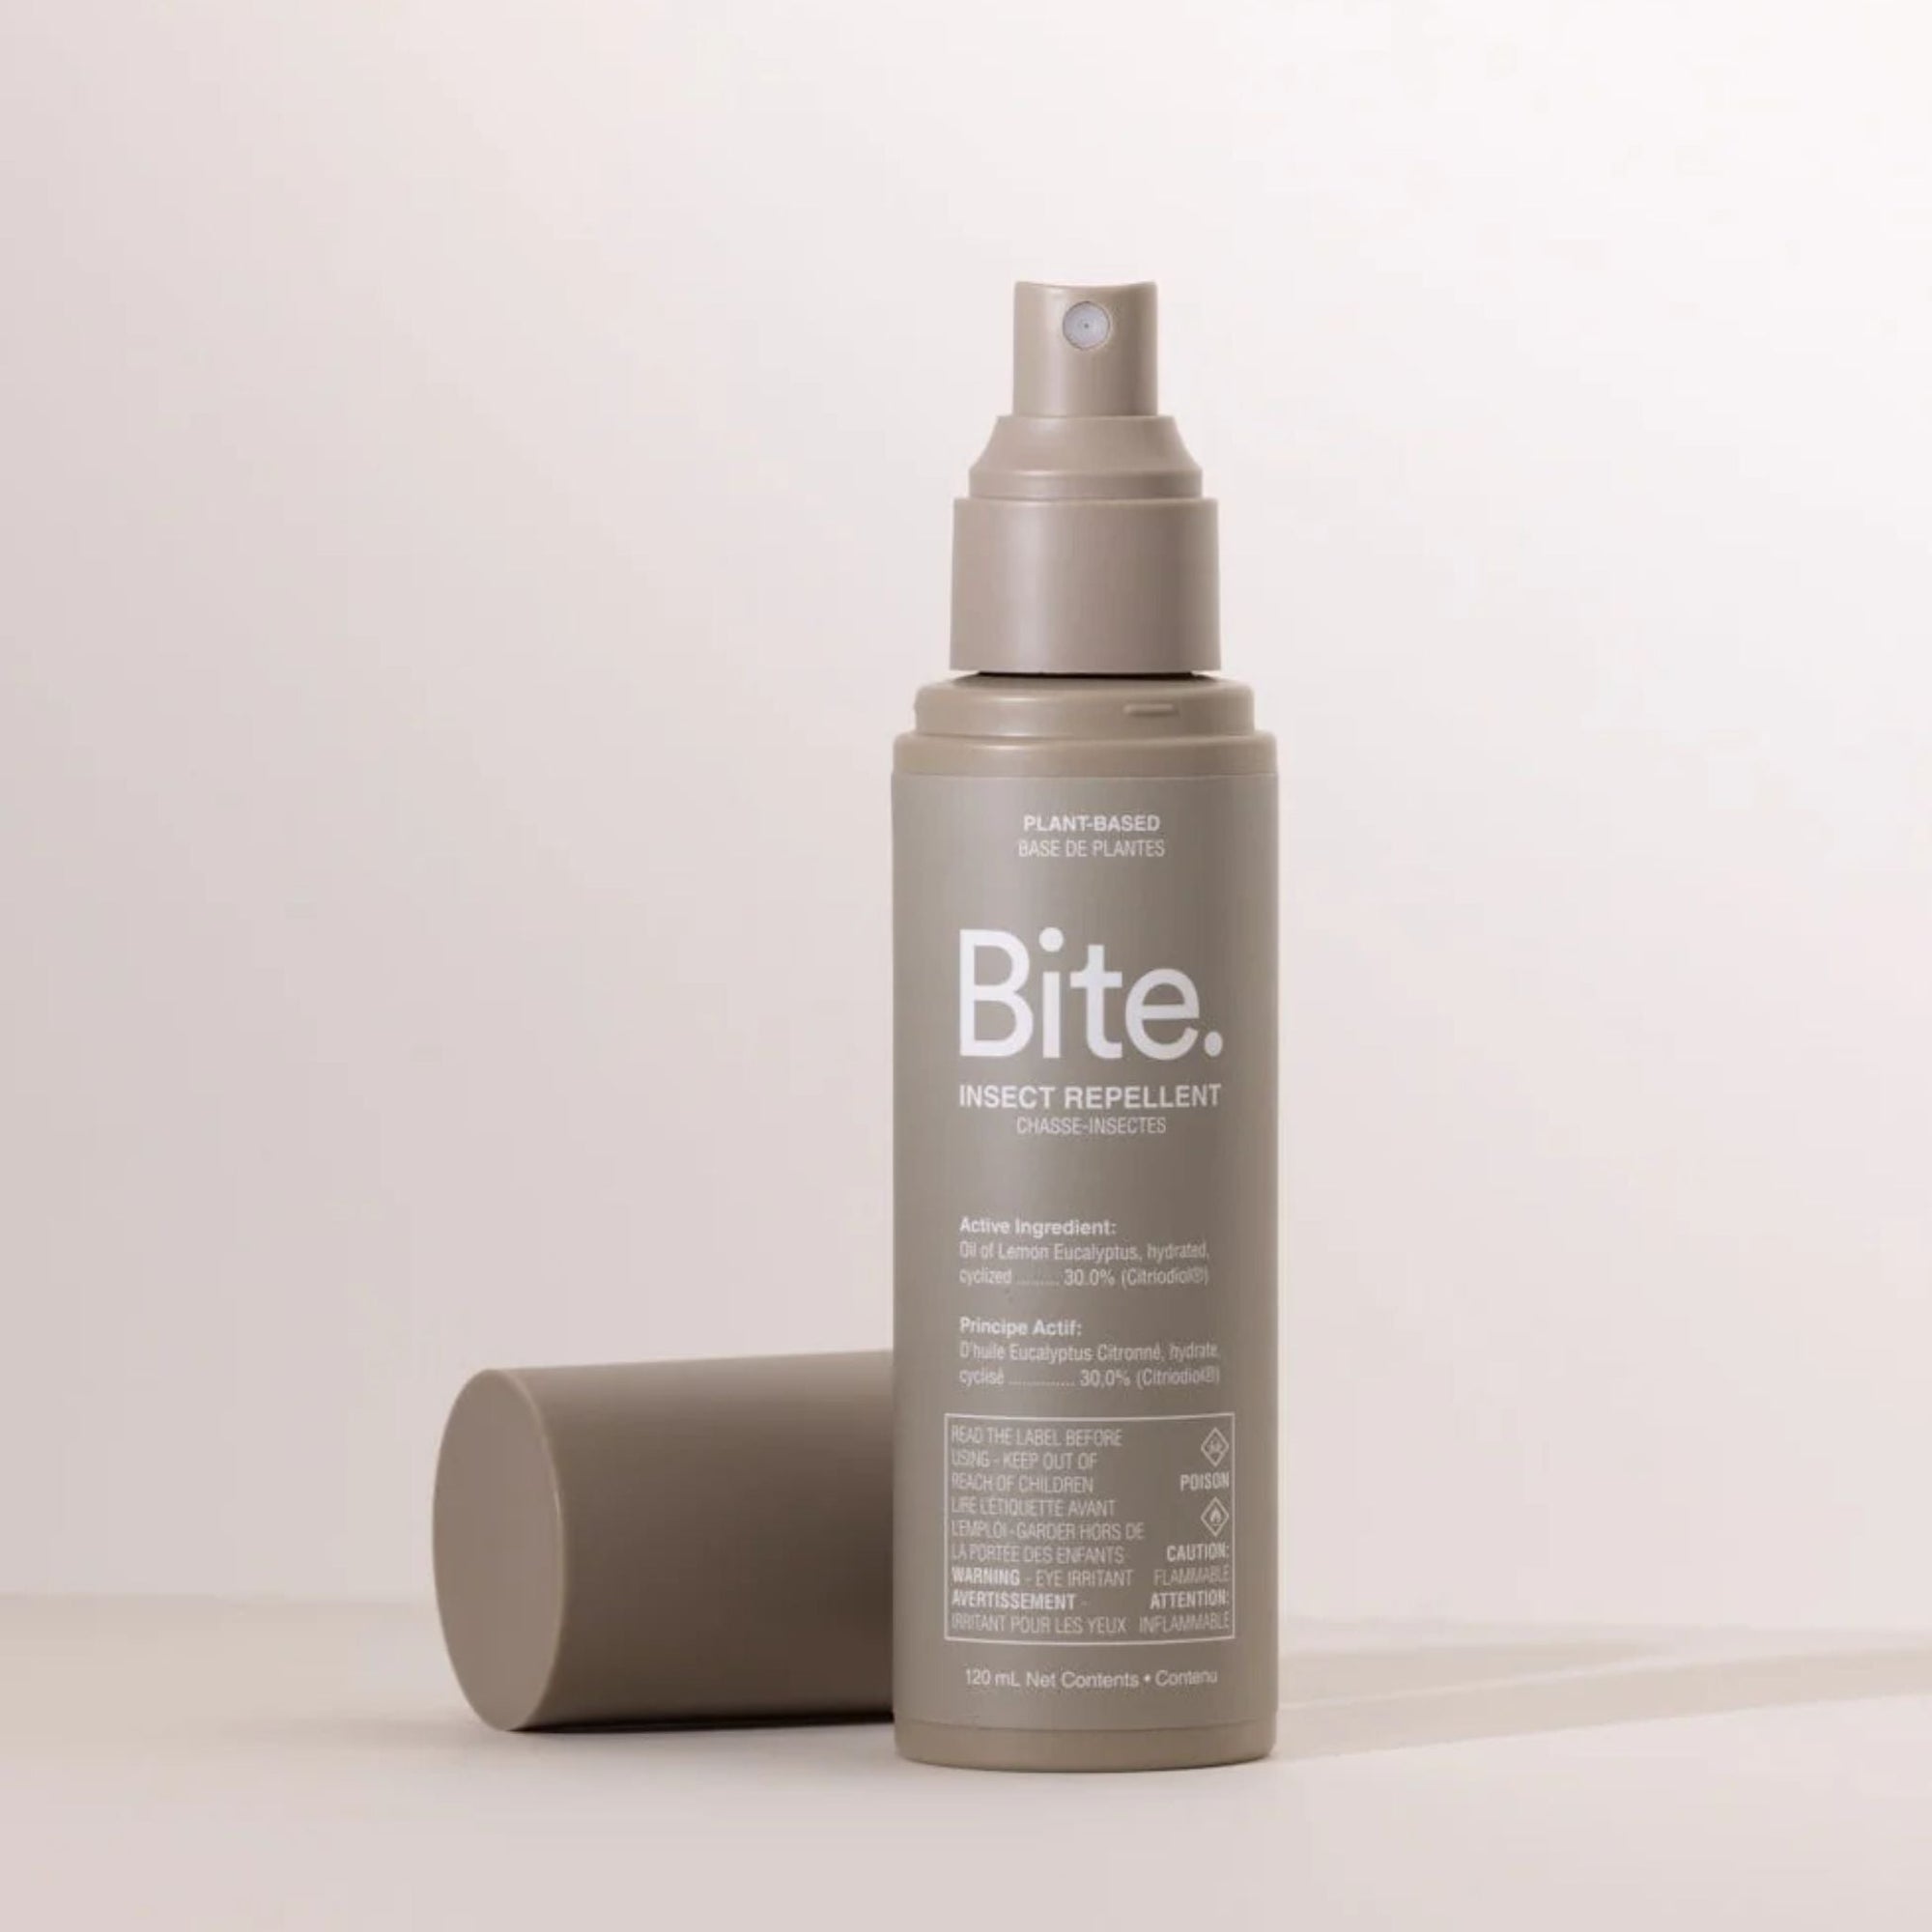 Bite Body - Bite Insect Repellent - ORESTA clean beauty simplified